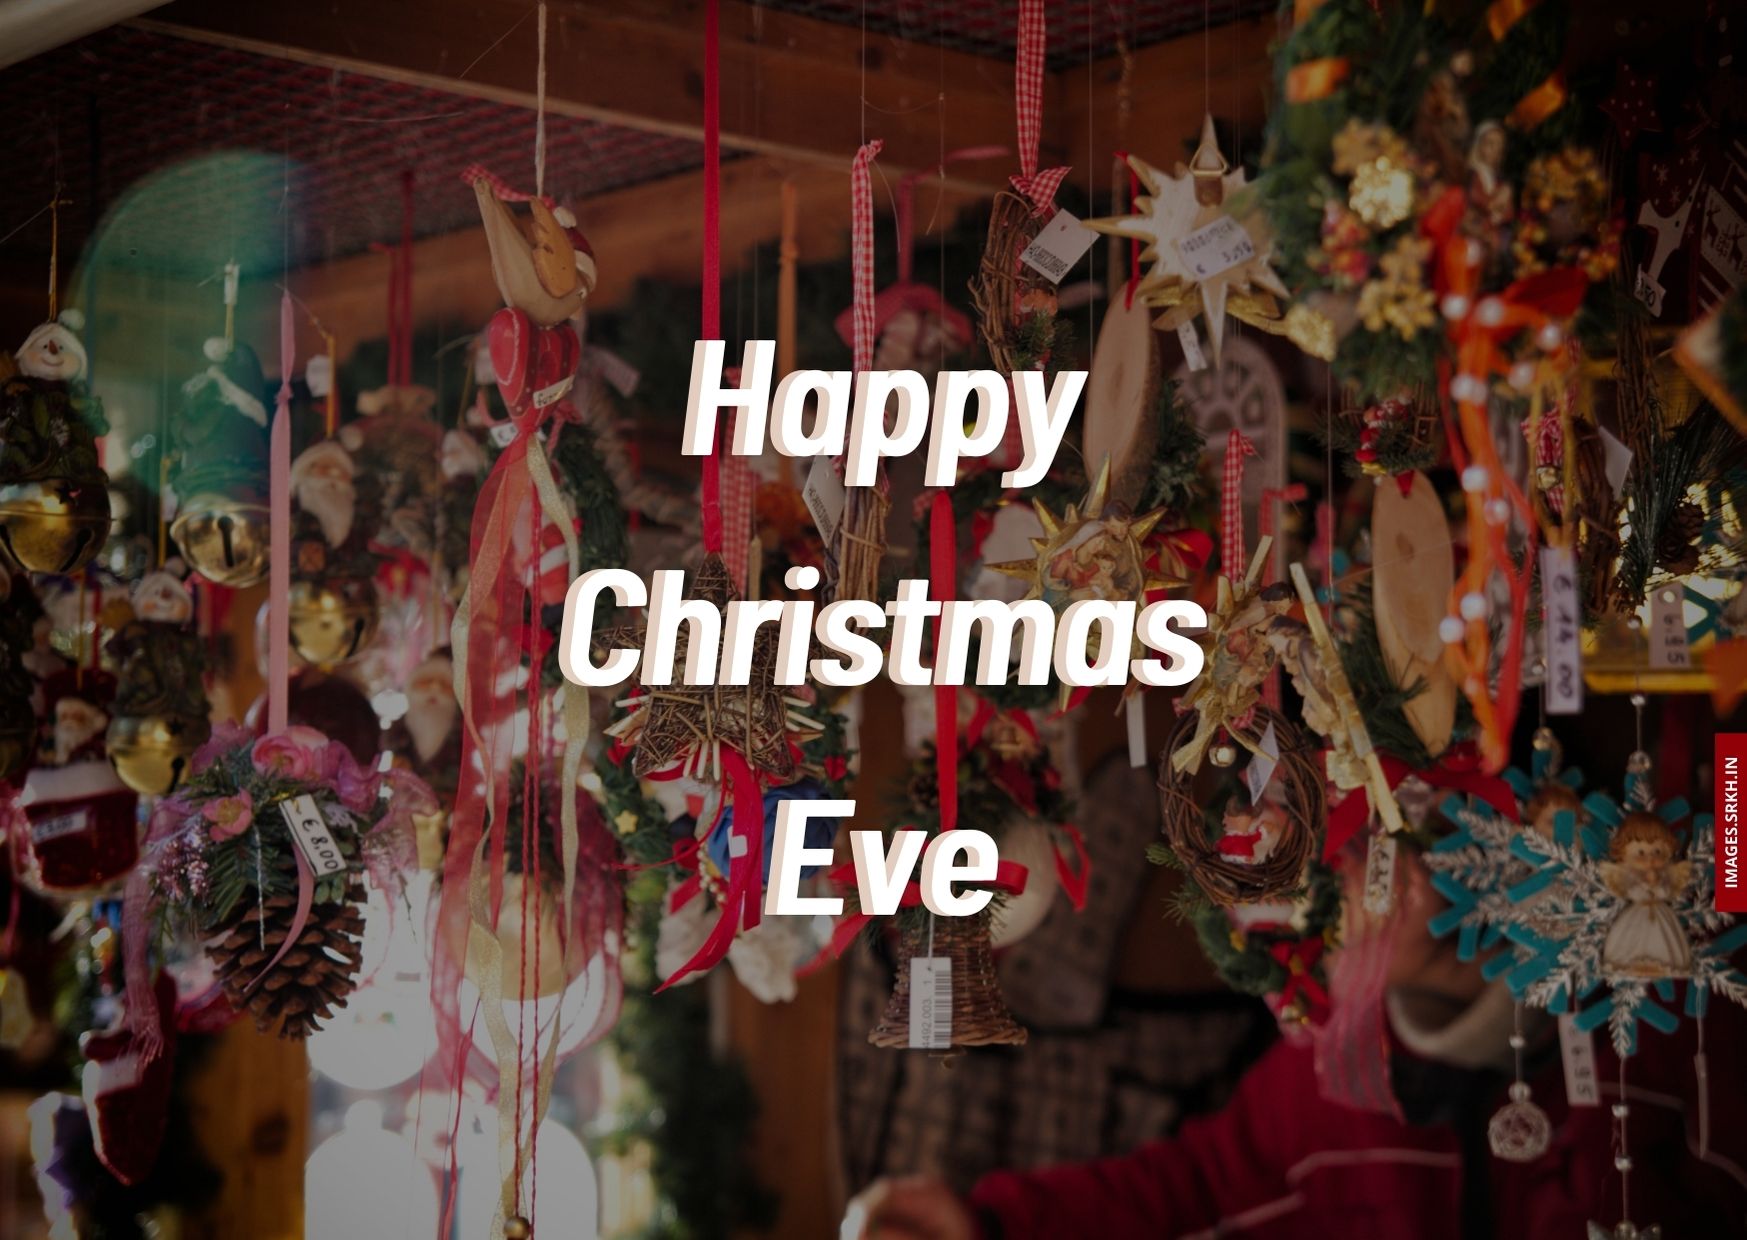 Happy Christmas Eve Images